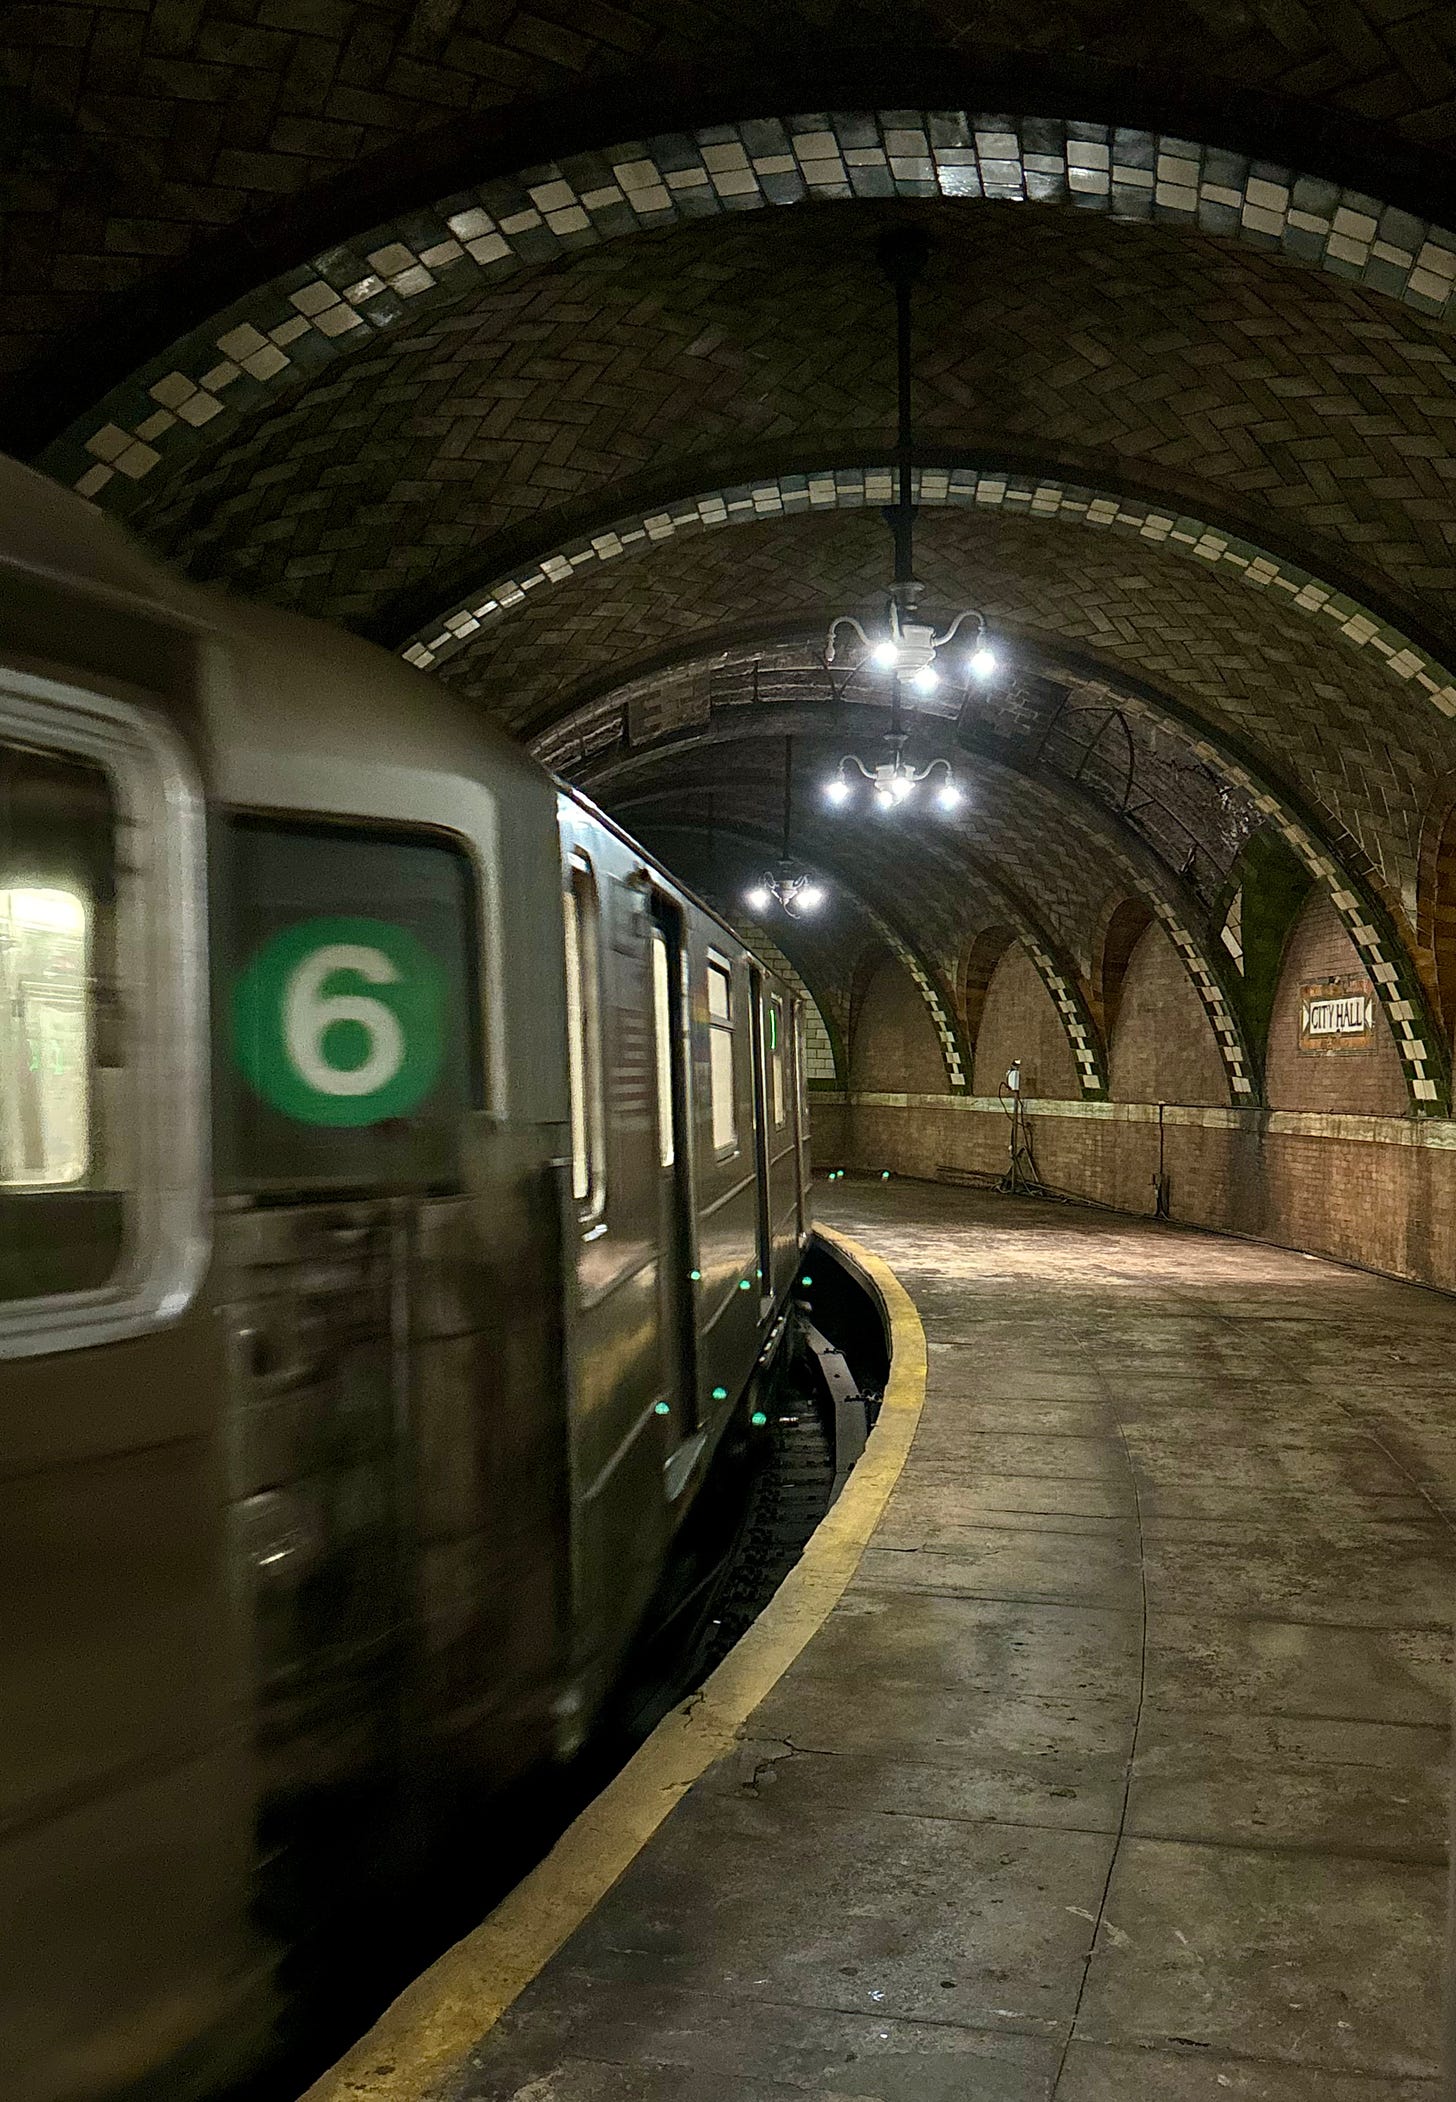 A 6 Train passes through a station with tiled arches and chandeliers hanging from the ceiling. On the wall is the name City Hall.